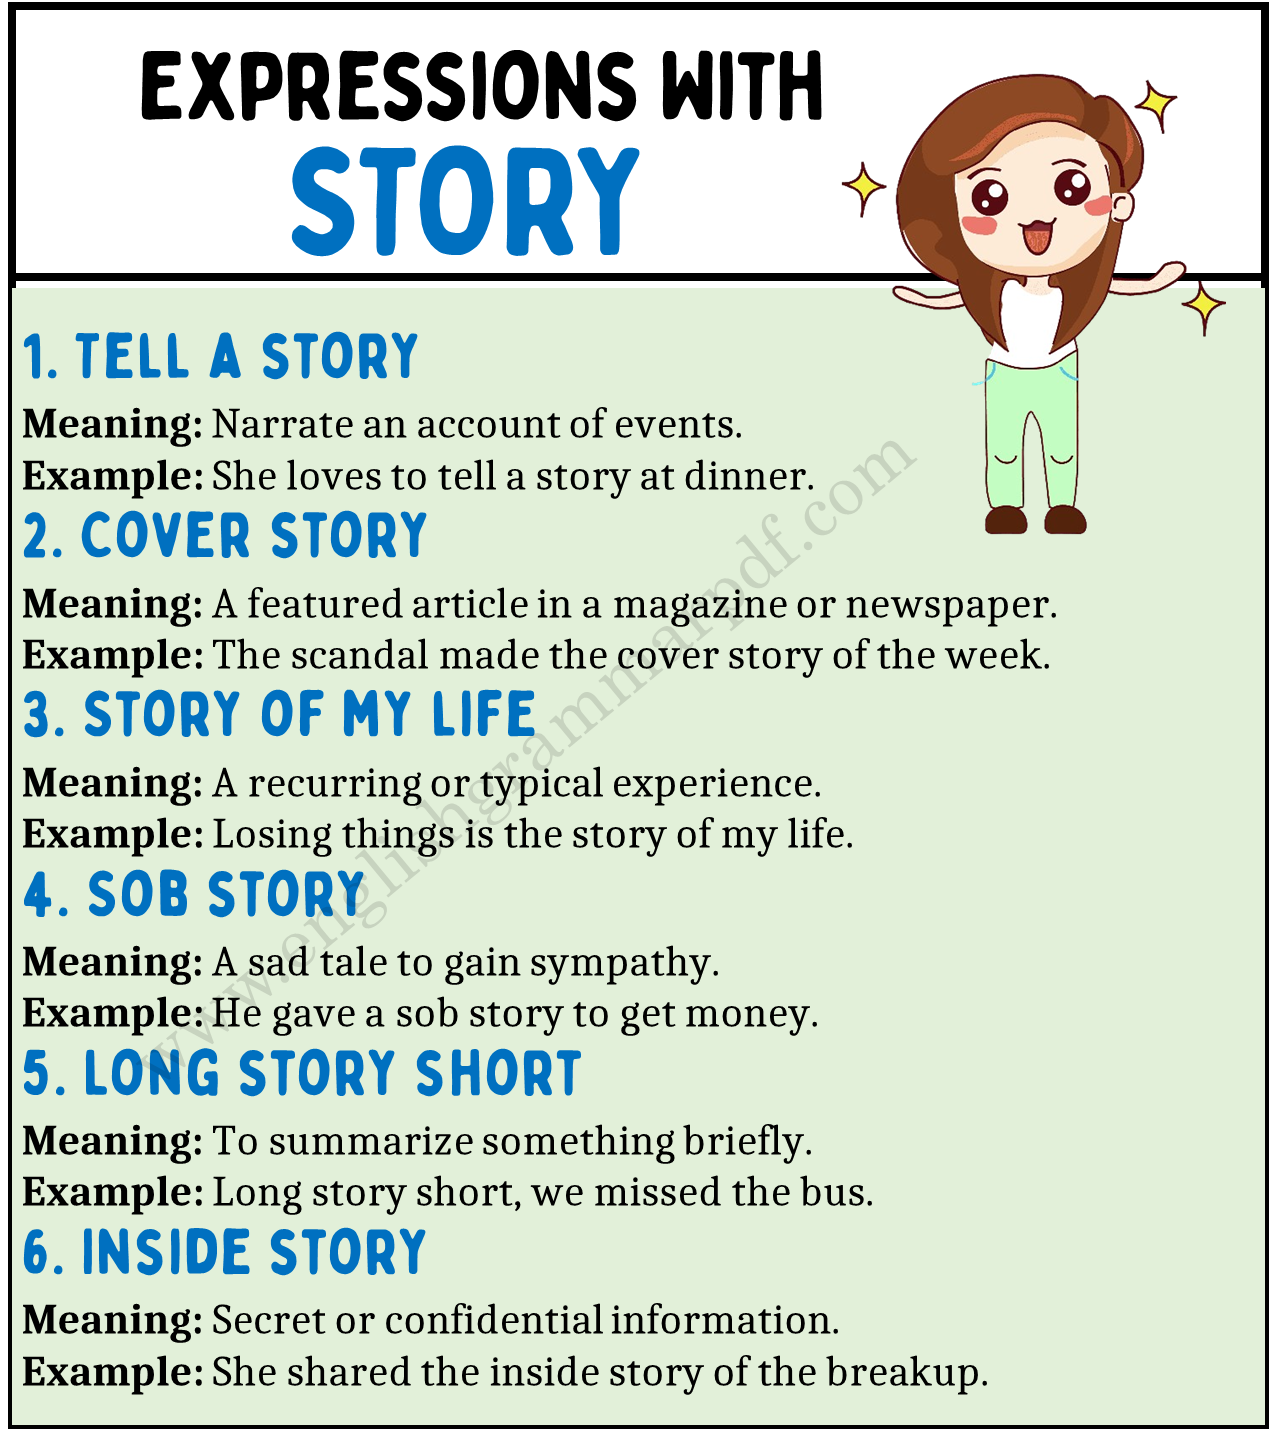 Expressions with Story